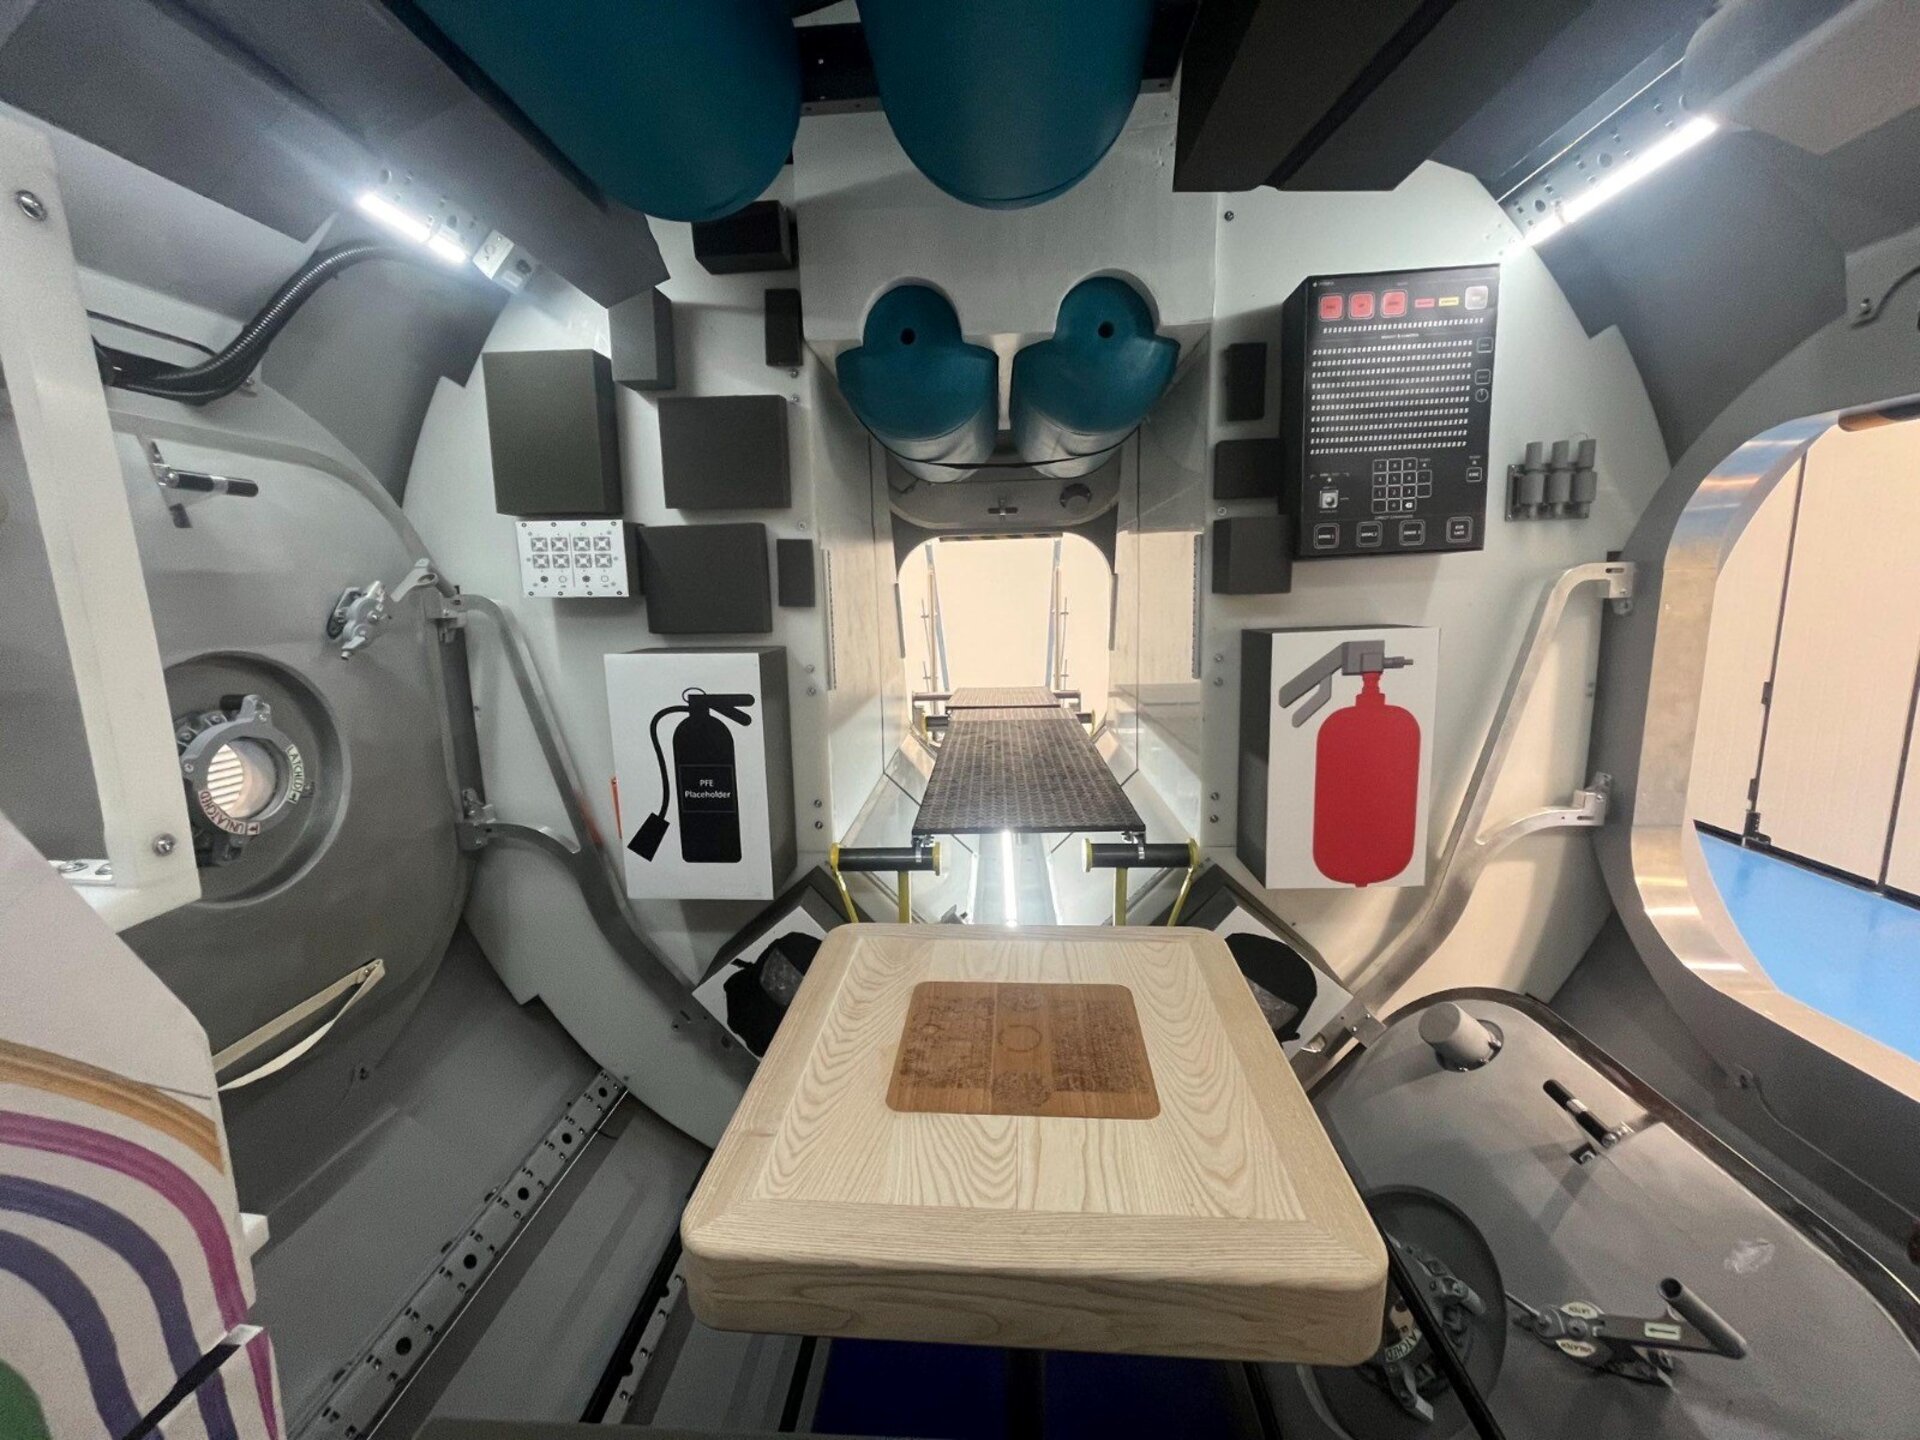 Station spatiale chinoise (Tiangong/CSS) - Page 23 Lunar_I-Hab_mock-up_interior_pillars